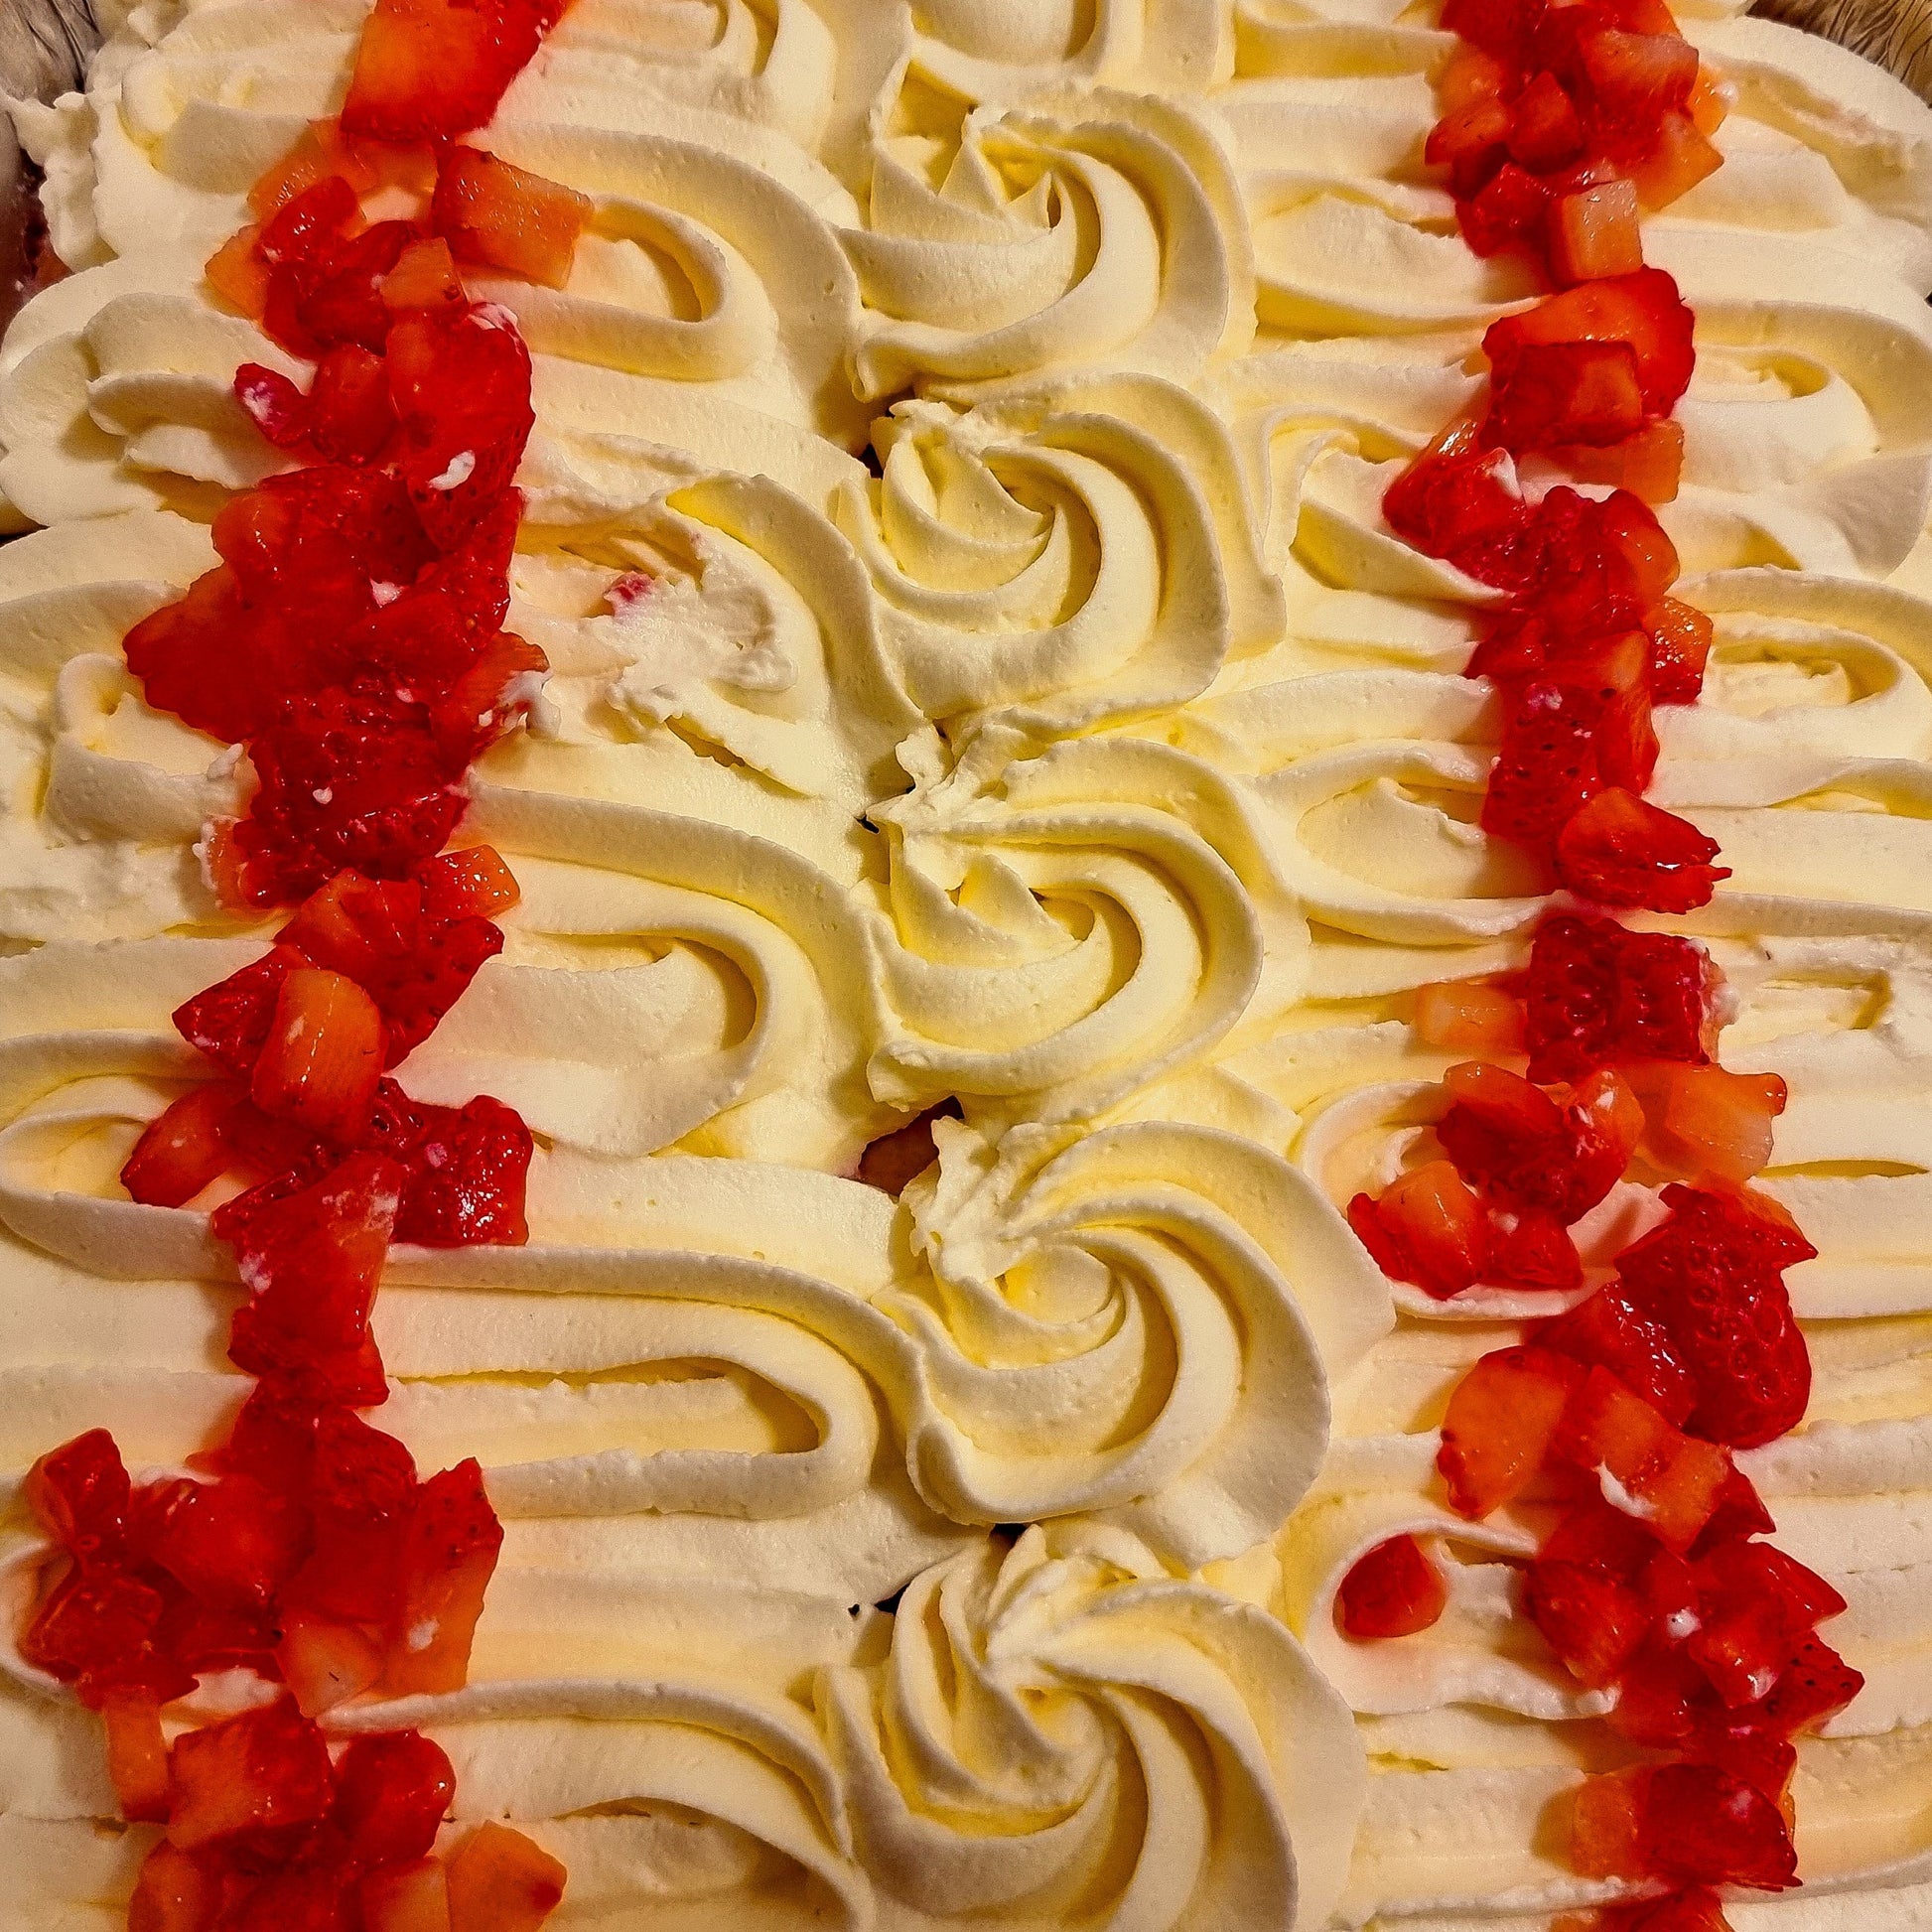 Scrumptious strawberry milk cake tray adorned with fresh strawberry slices